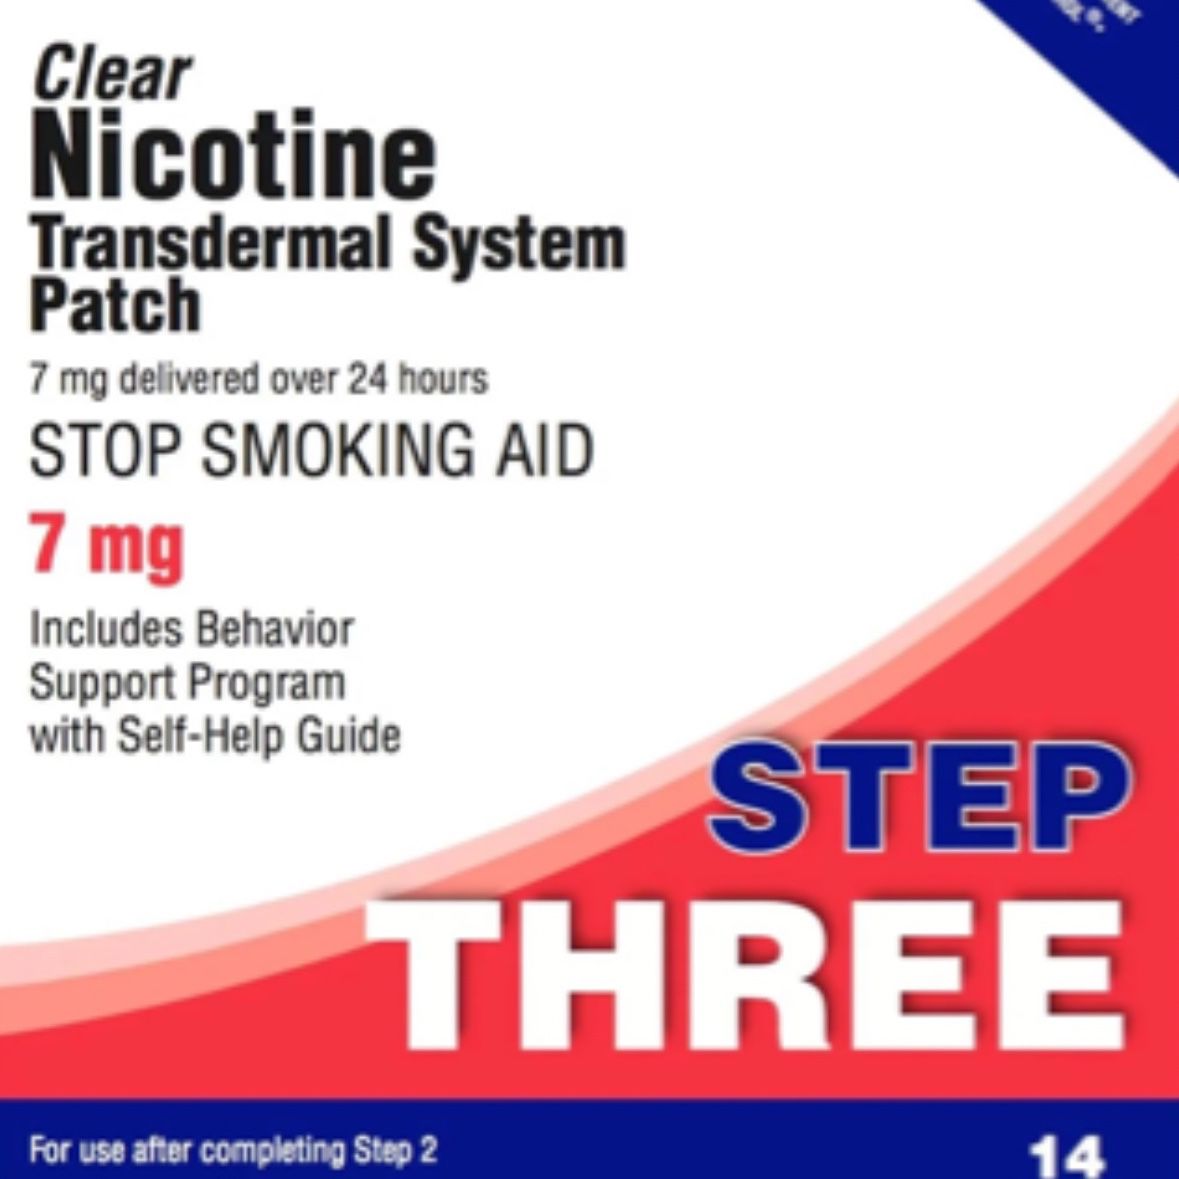 Rugby Clear Nicotine Transdermal System 7 mg (14 Patches)